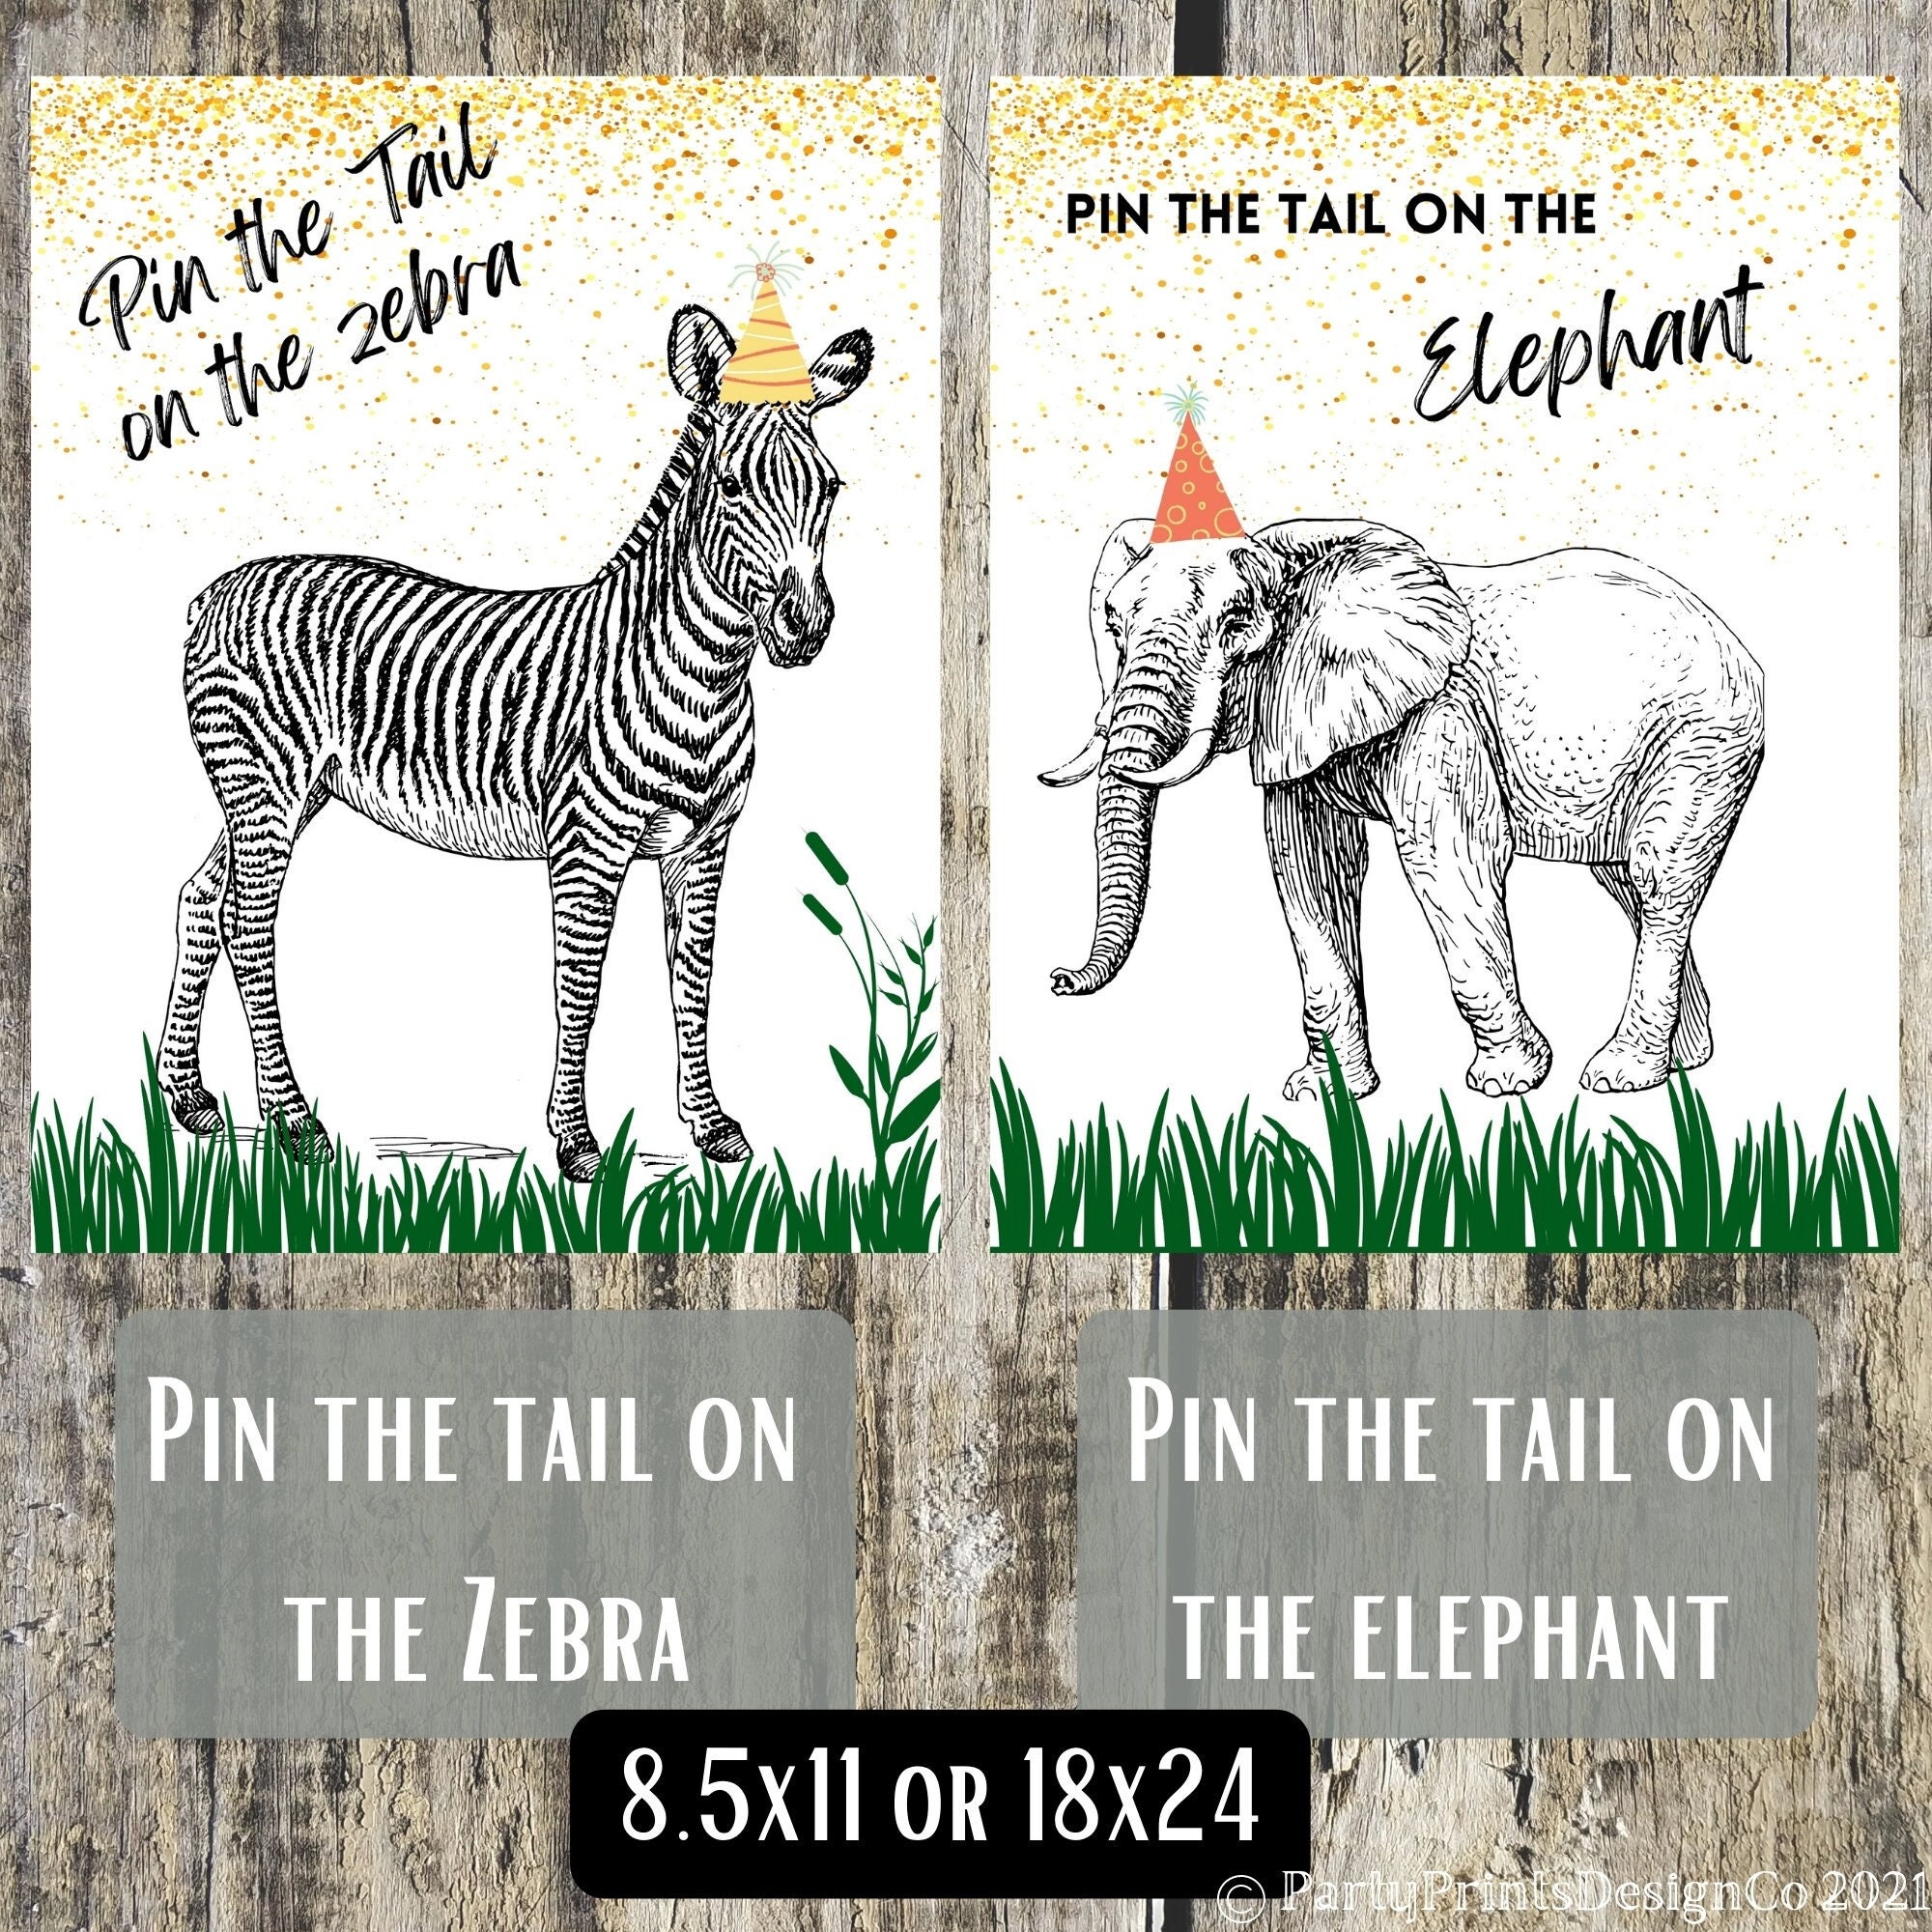 maflen building blcok birthday party supplies,pin the tail on the